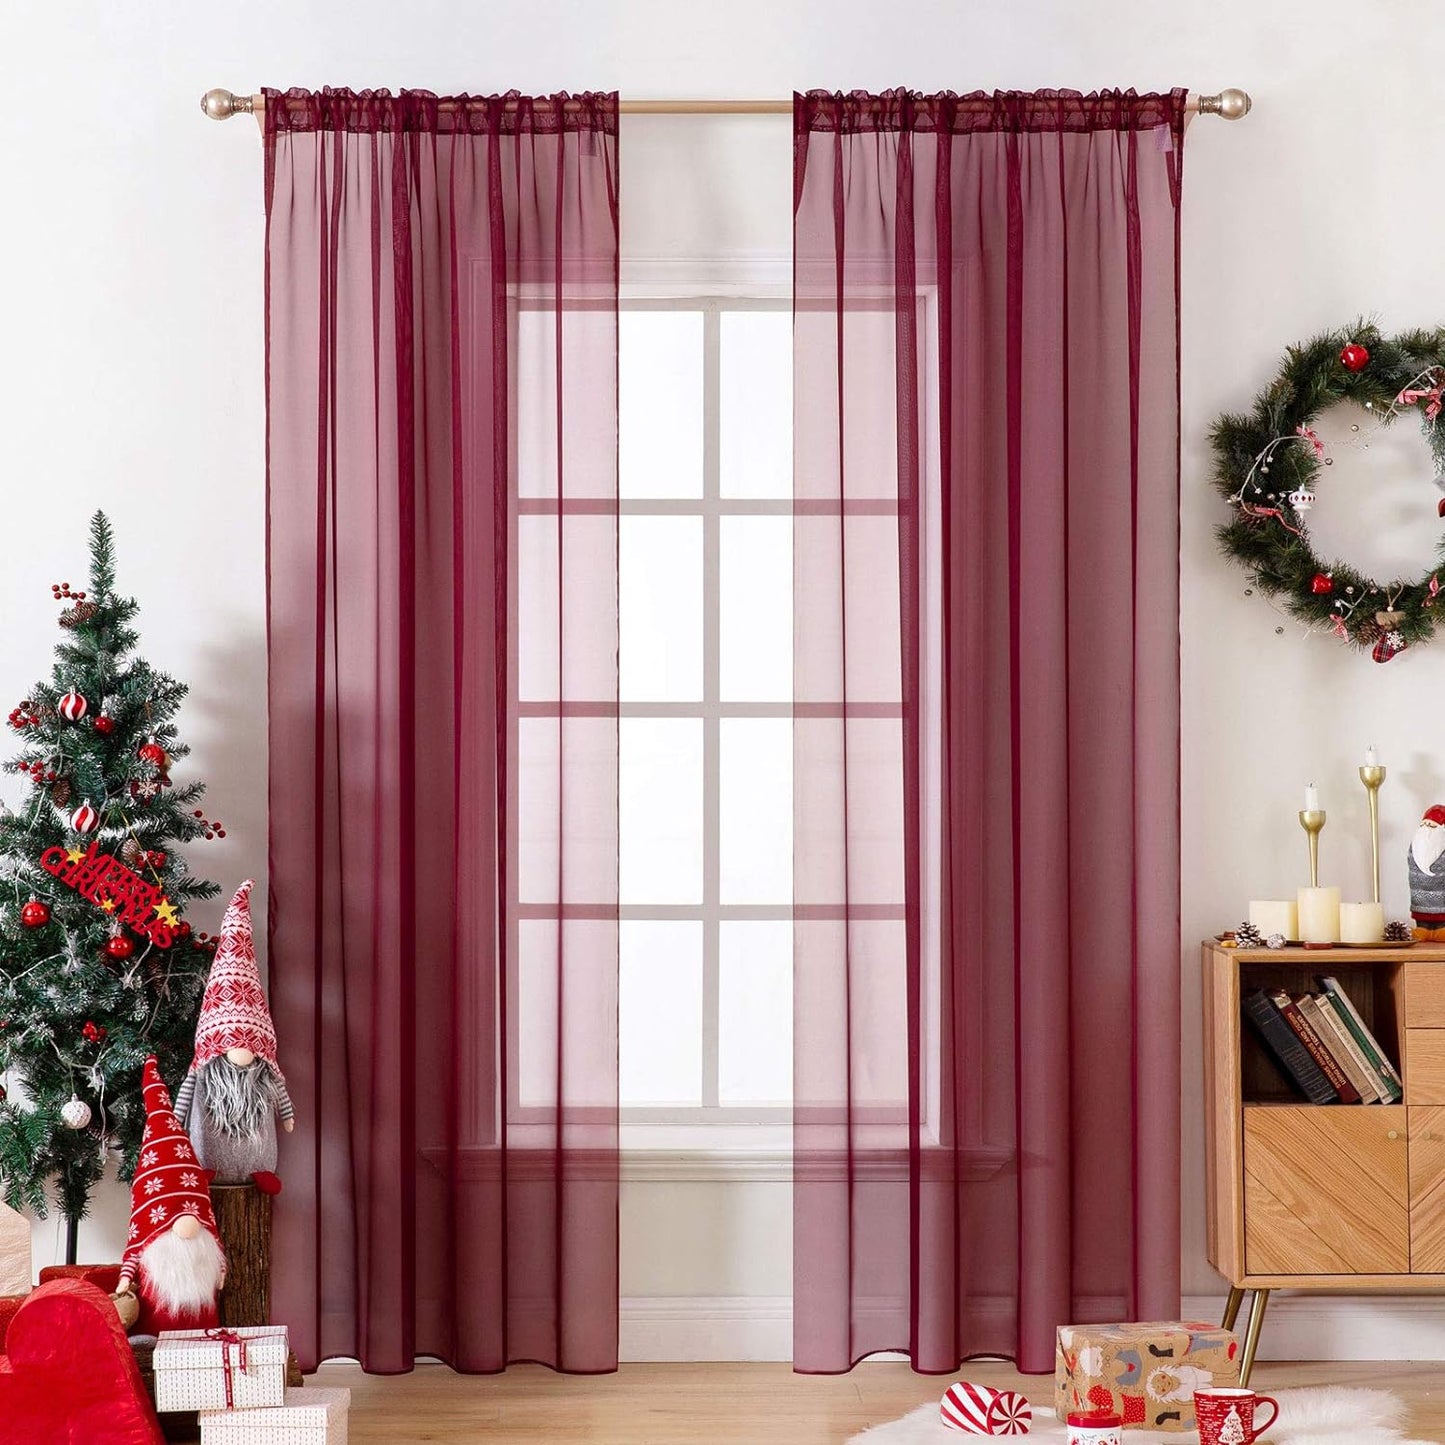 MIULEE White Sheer Curtains 96 Inches Long Window Curtains 2 Panels Solid Color Elegant Window Voile Panels/Drapes/Treatment for Bedroom Living Room (54 X 96 Inches White)  MIULEE Maroon Red 54''W X 84''L 